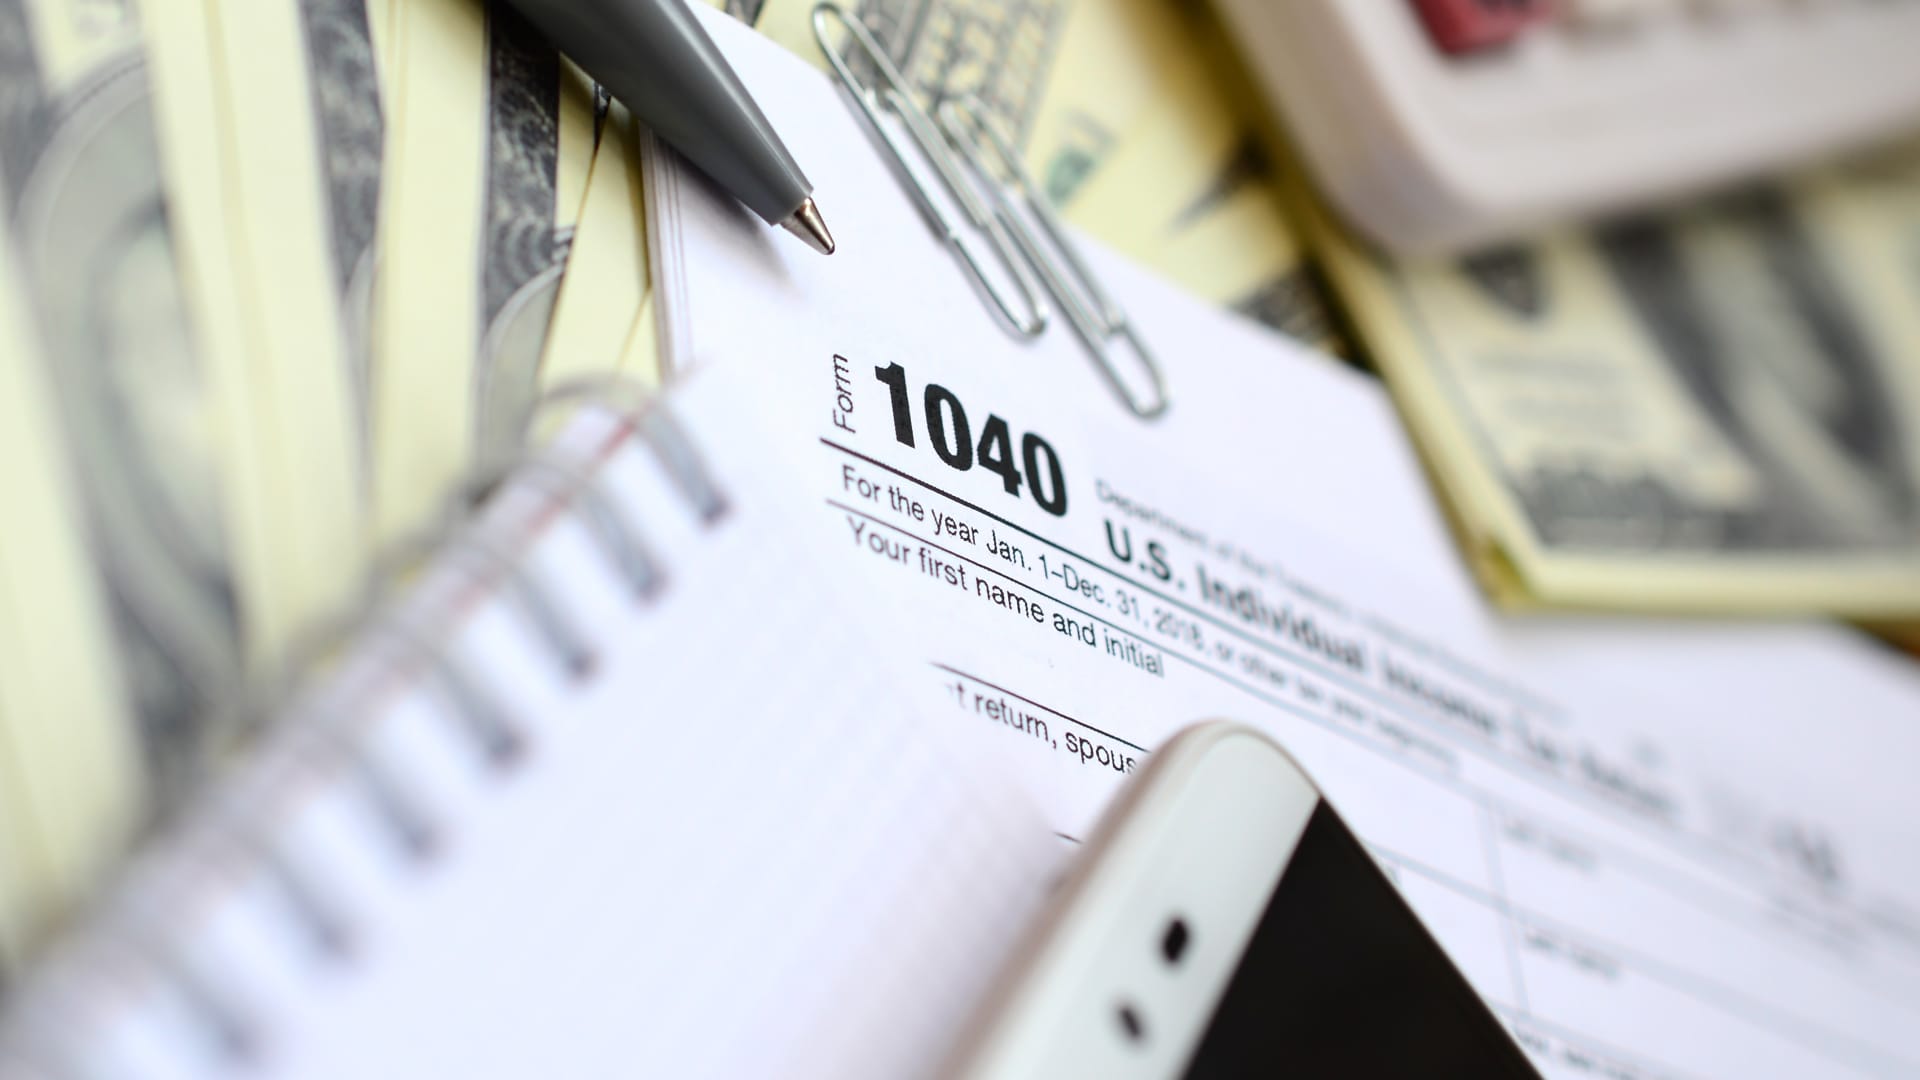 Here's how you can file your federal tax returns for free using FreeTaxUSA